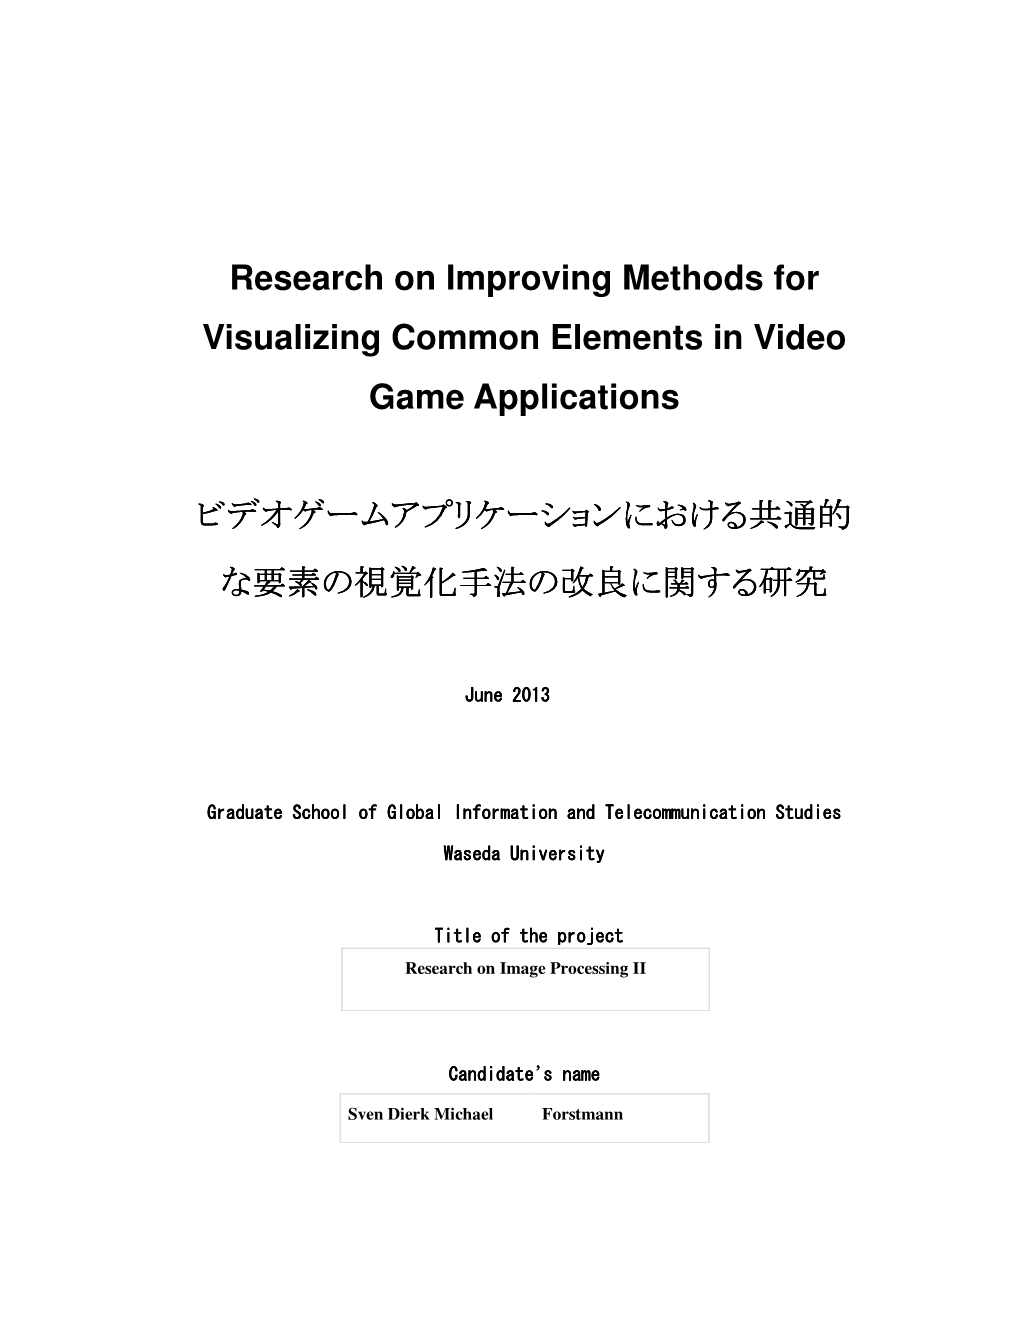 Research on Improving Methods for Visualizing Common Elements in Video Game Applications ビデオゲームアプリケーショ